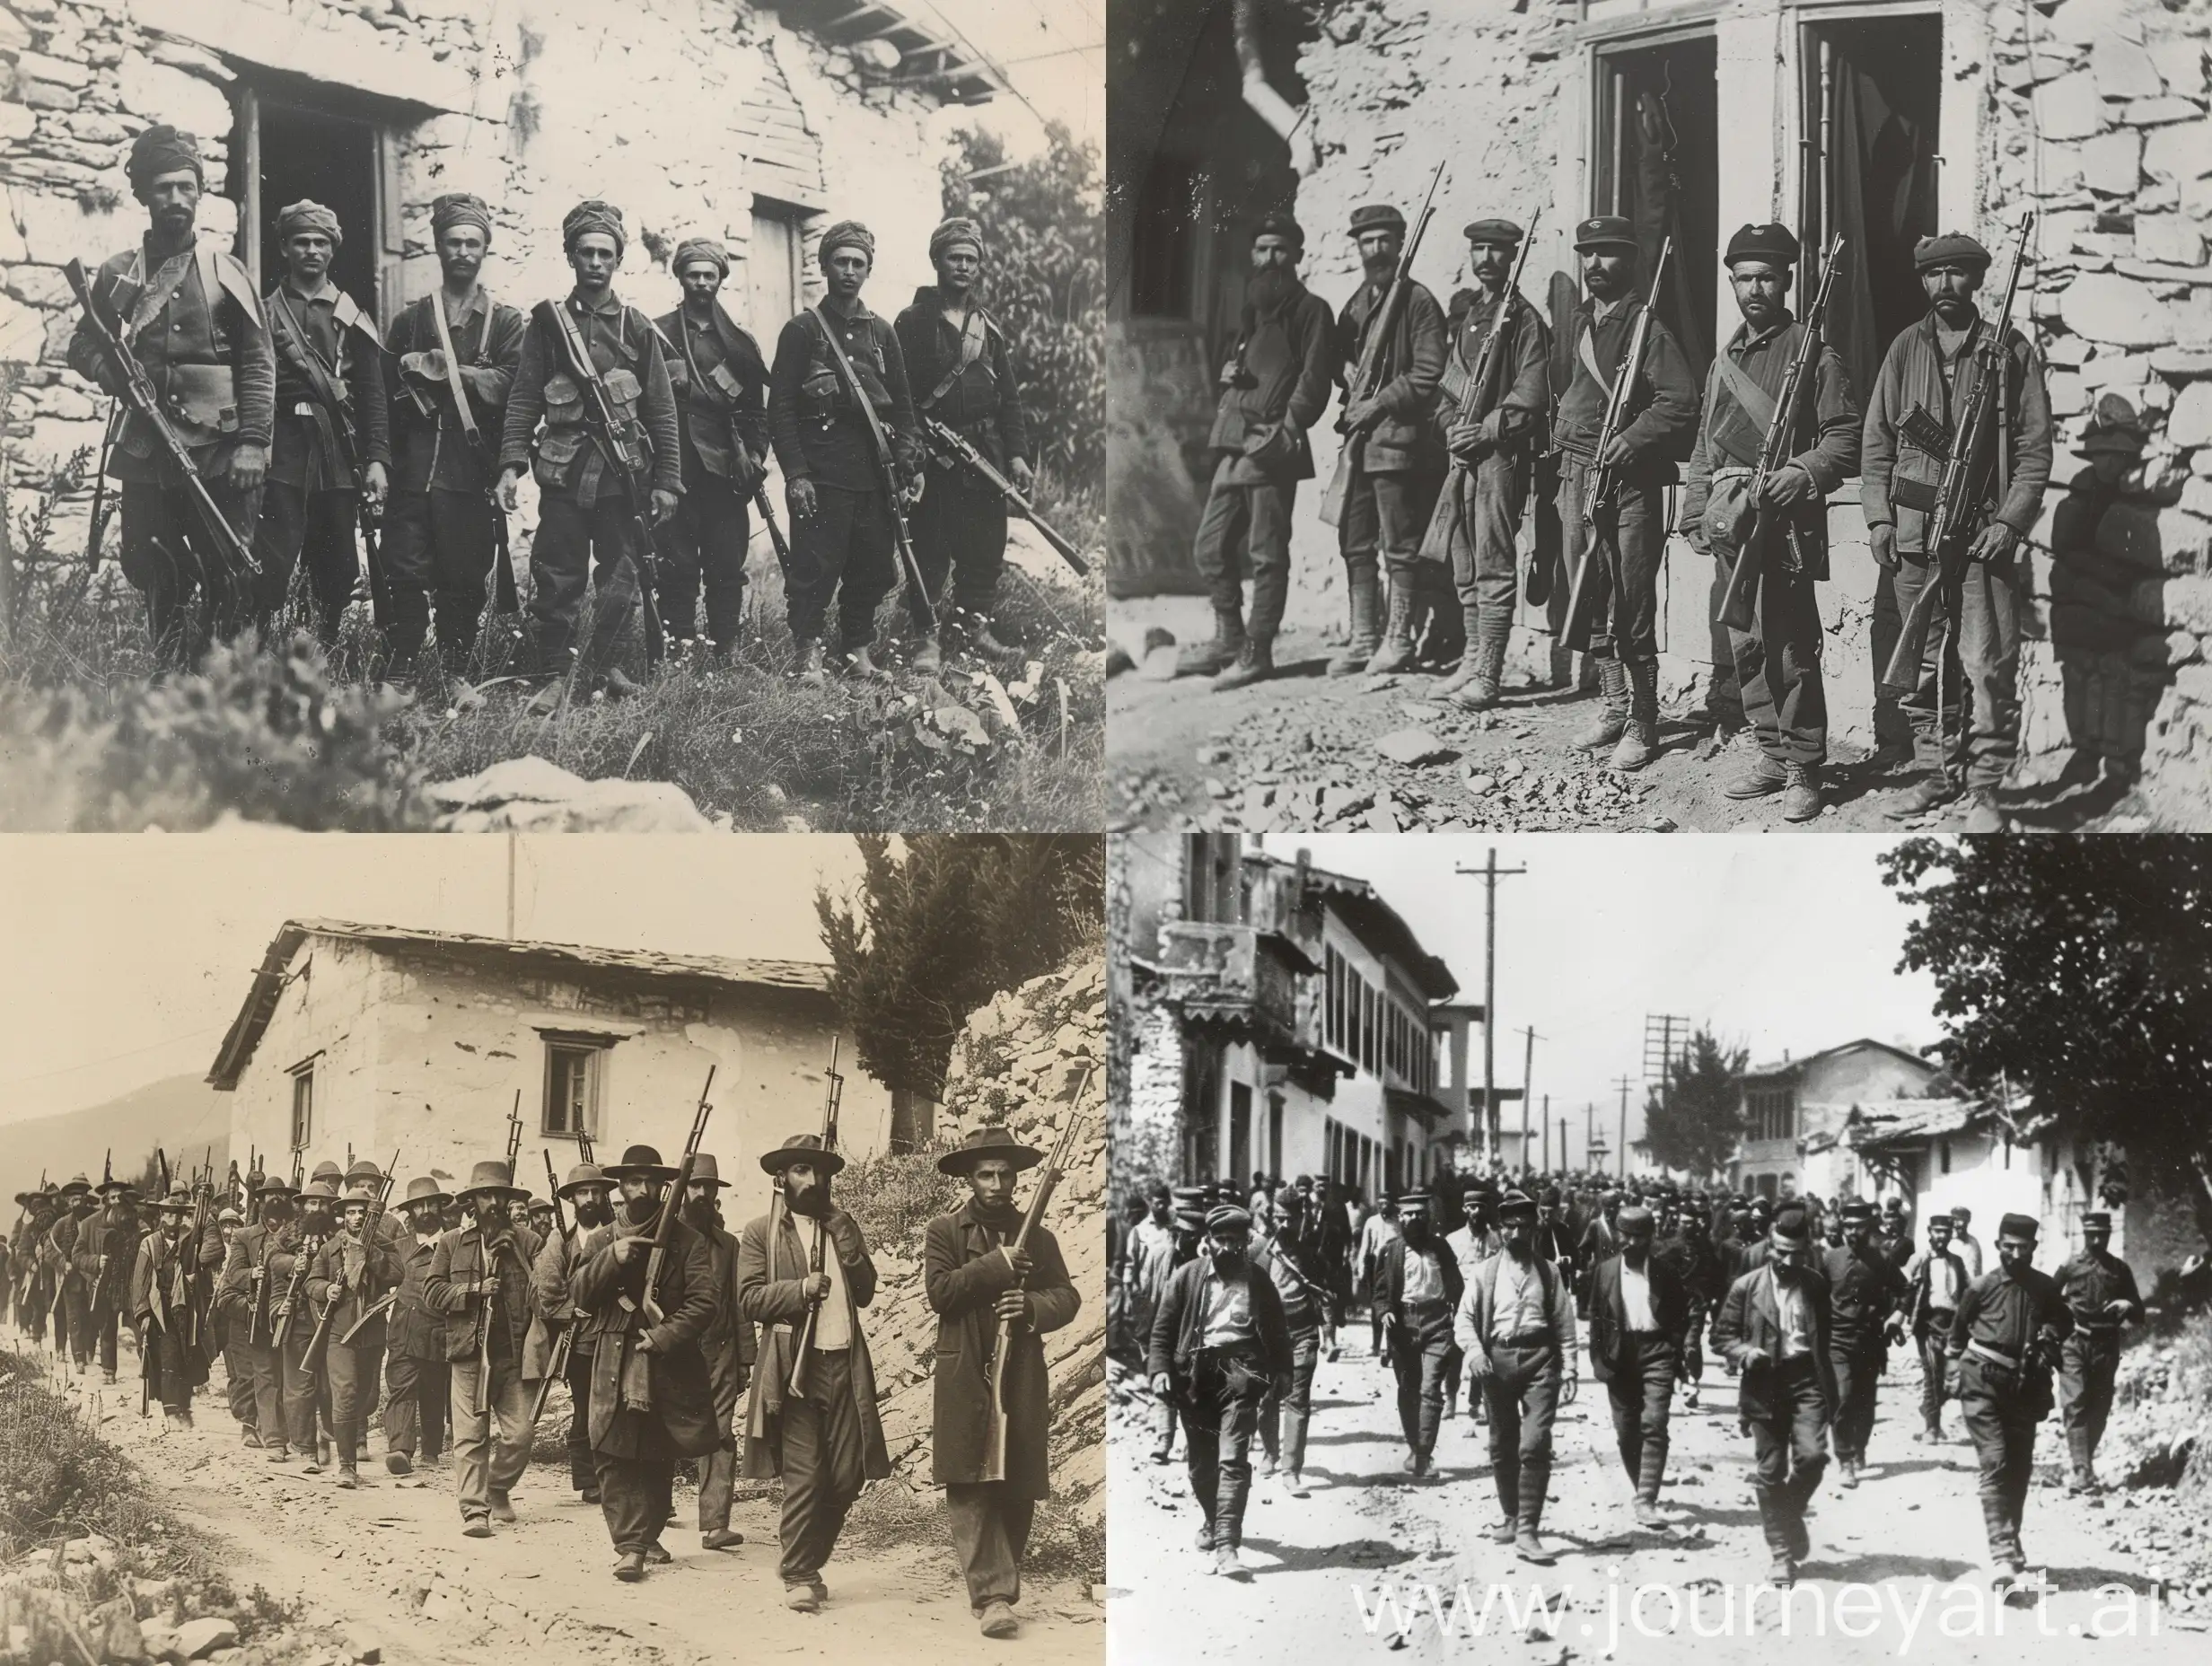 From the spring of 1921 onwards, the activity of Turkish gangs in the region geographically extending south of Izmit increased significantly. During this period, the gangs supporting the Turkish national struggle began to display a more organized and intense resistance against the Greek occupation in the region. This led to clashes not only with Greek forces, but also with Christian villages in the region.